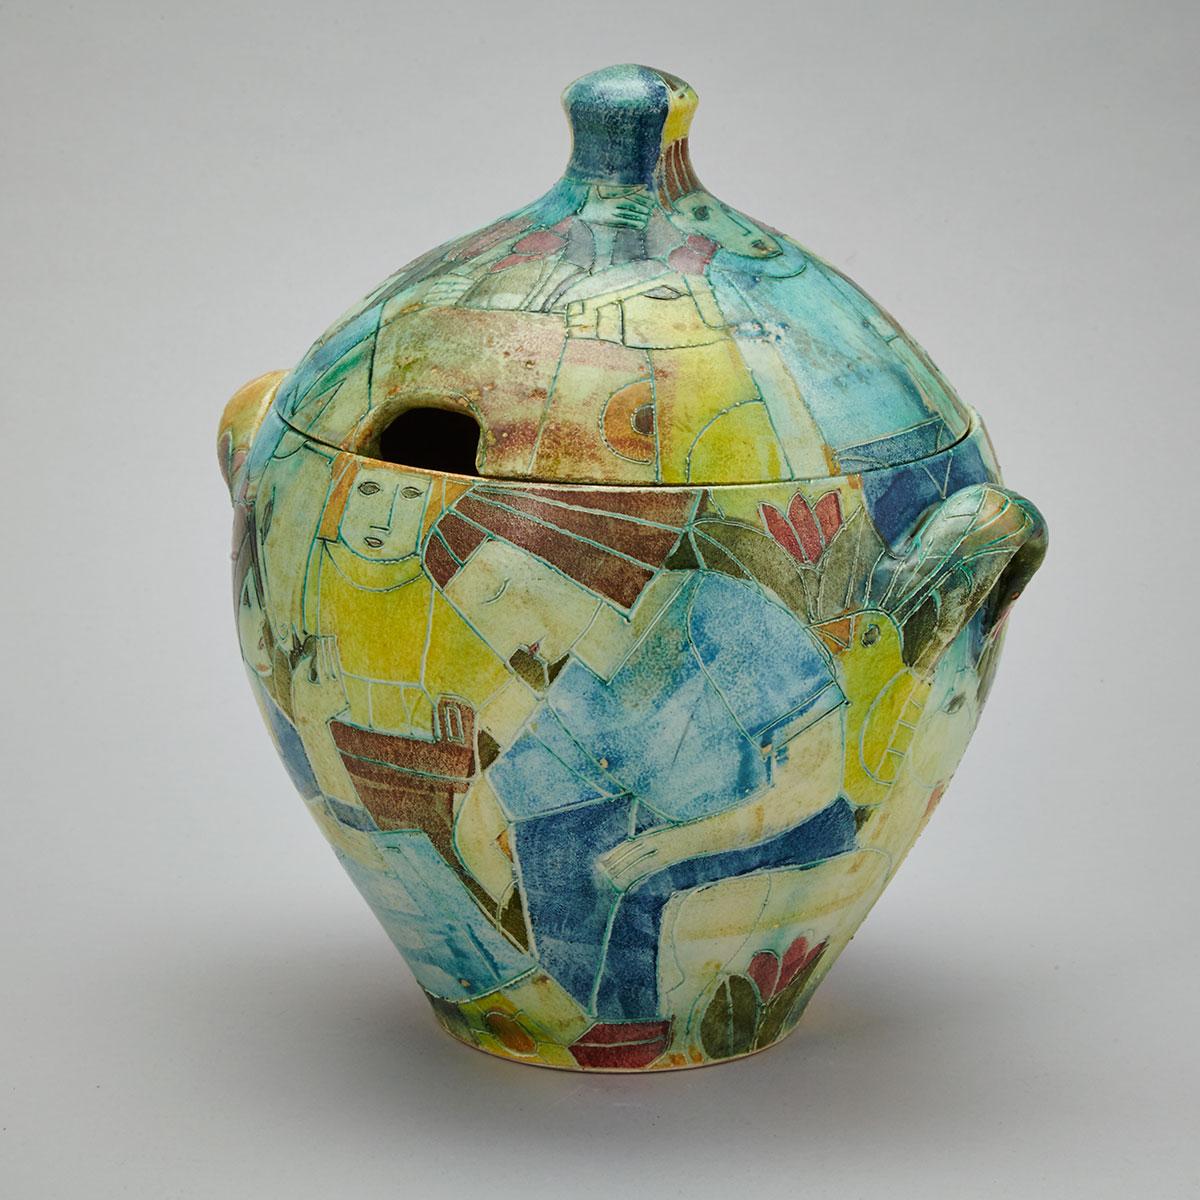 Brooklin Pottery Covered Soup Tureen, Theo and Susan Harlander, c.1978